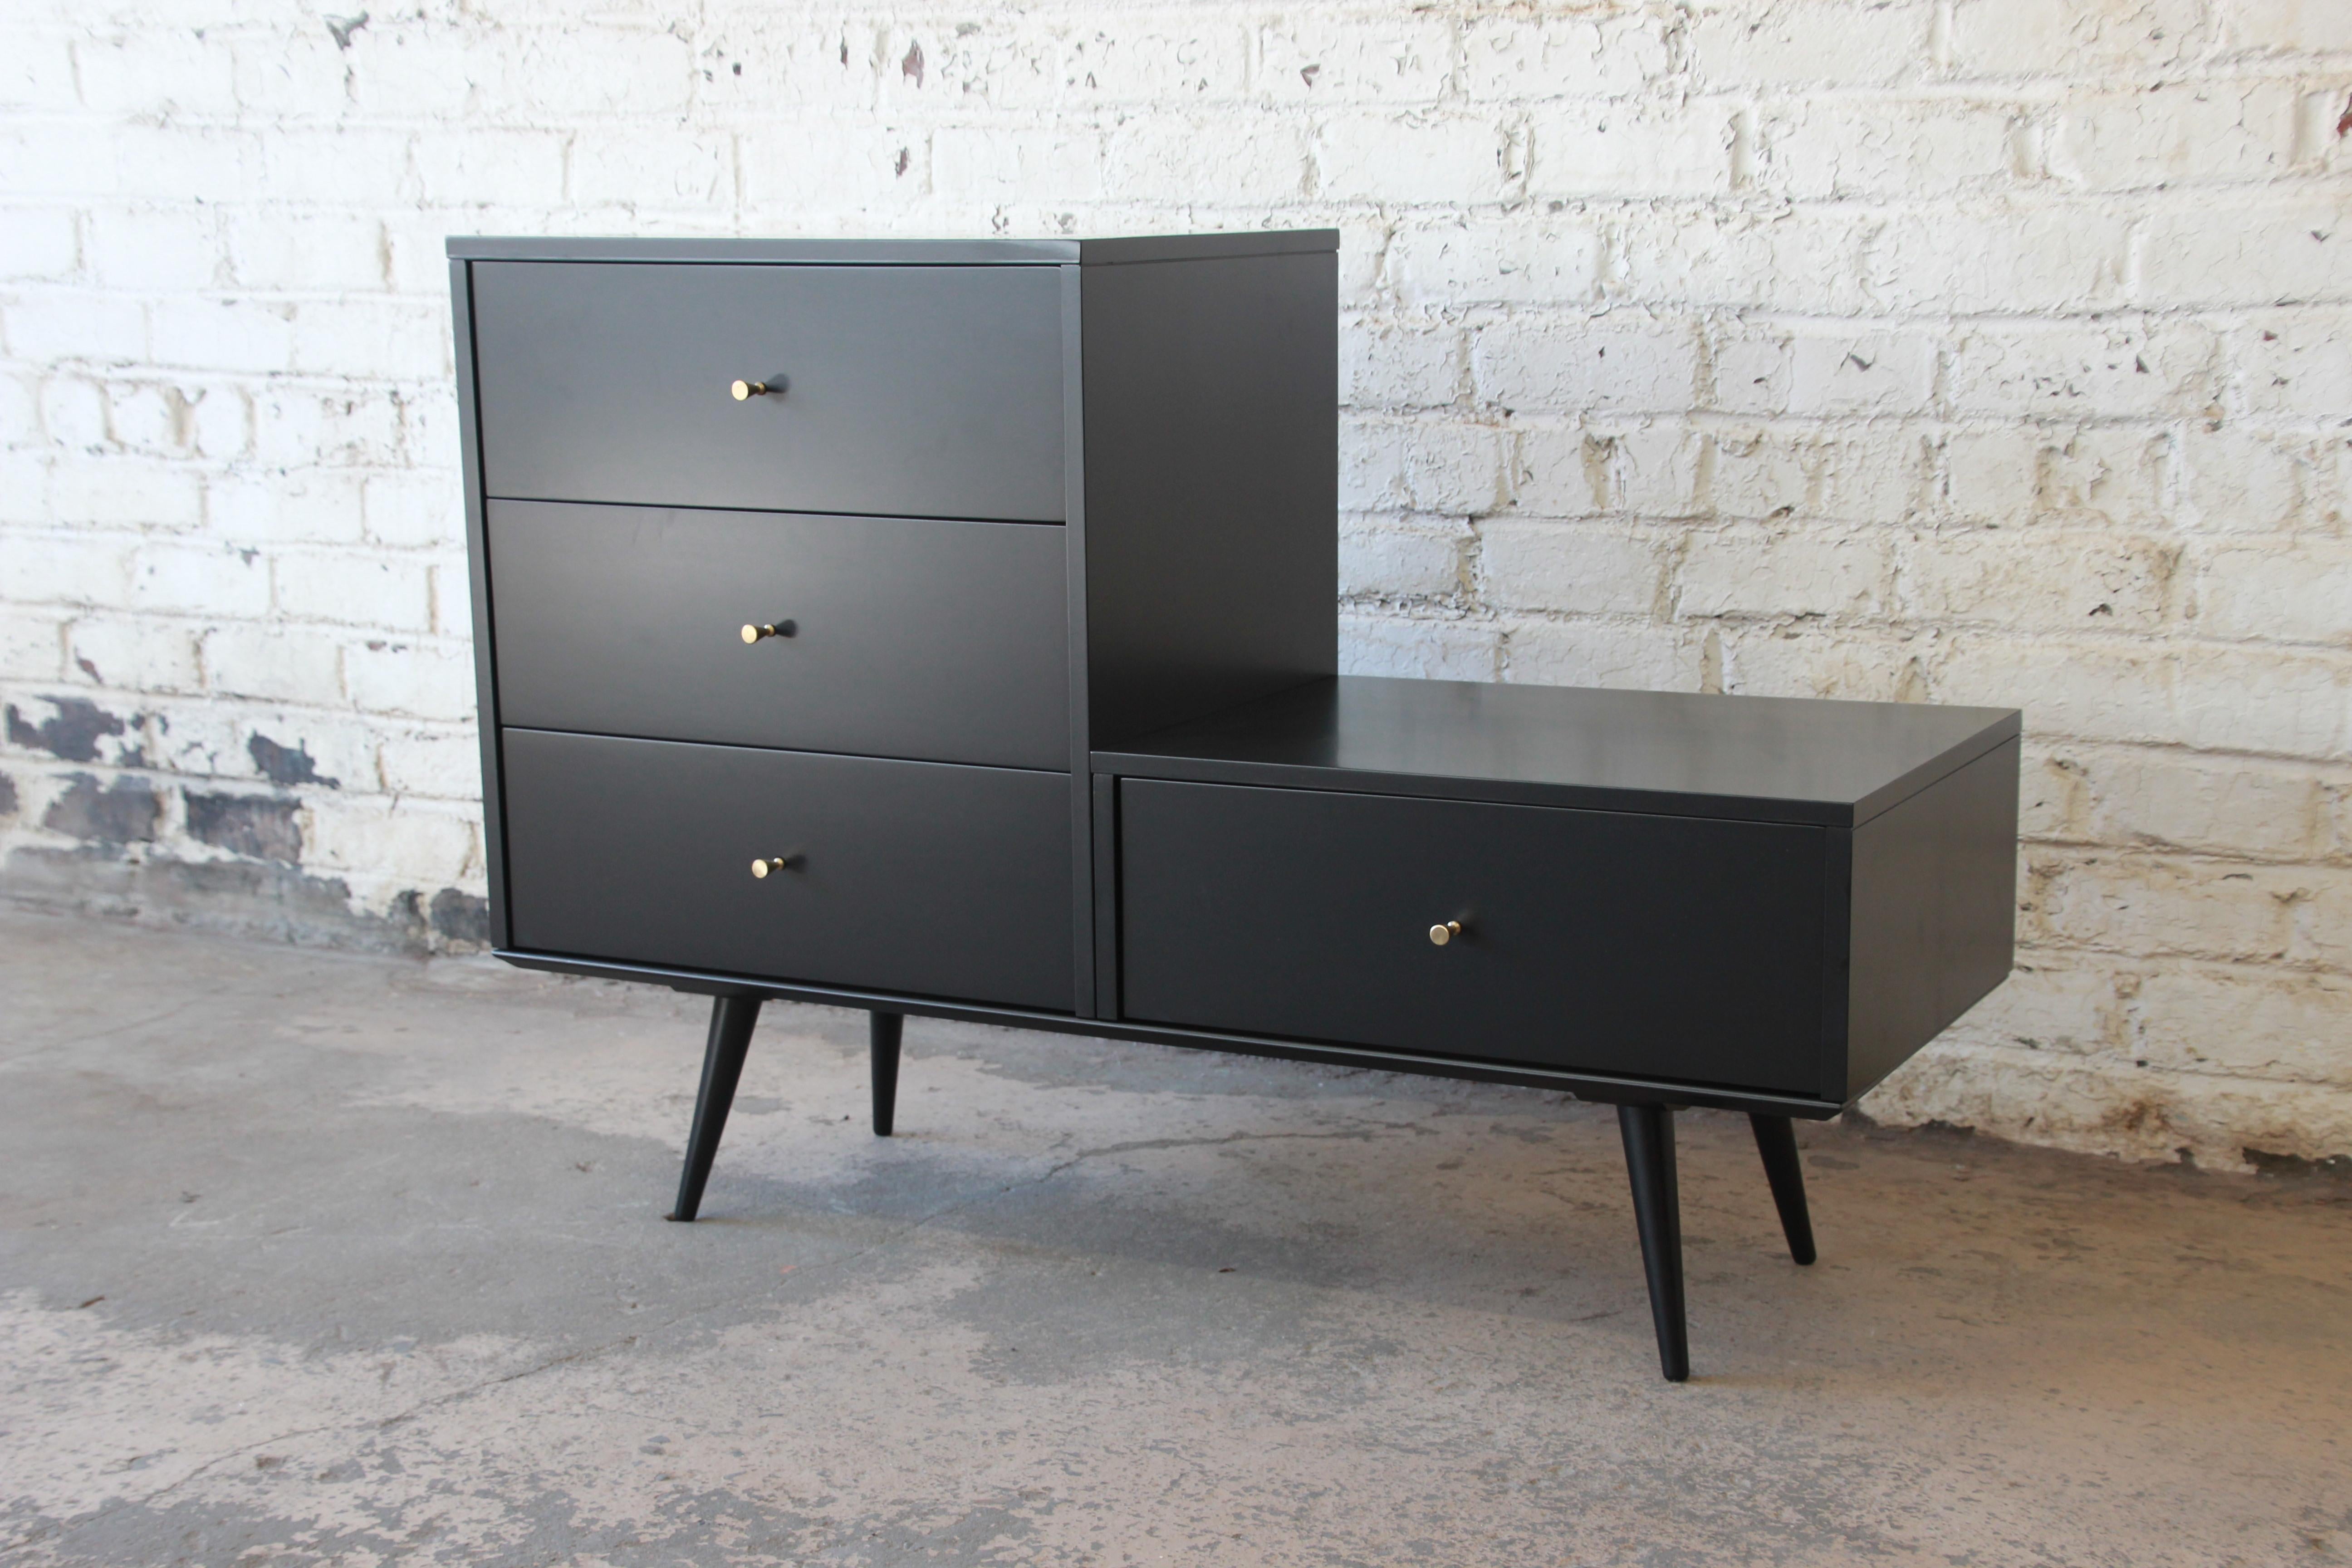 A rare and unique modular three-drawer dresser designed by Paul McCobb for his Planner Group line for Winchendon Furniture. The dresser features two separate chests, one with three drawers and another with a single drawer, both on a platform base